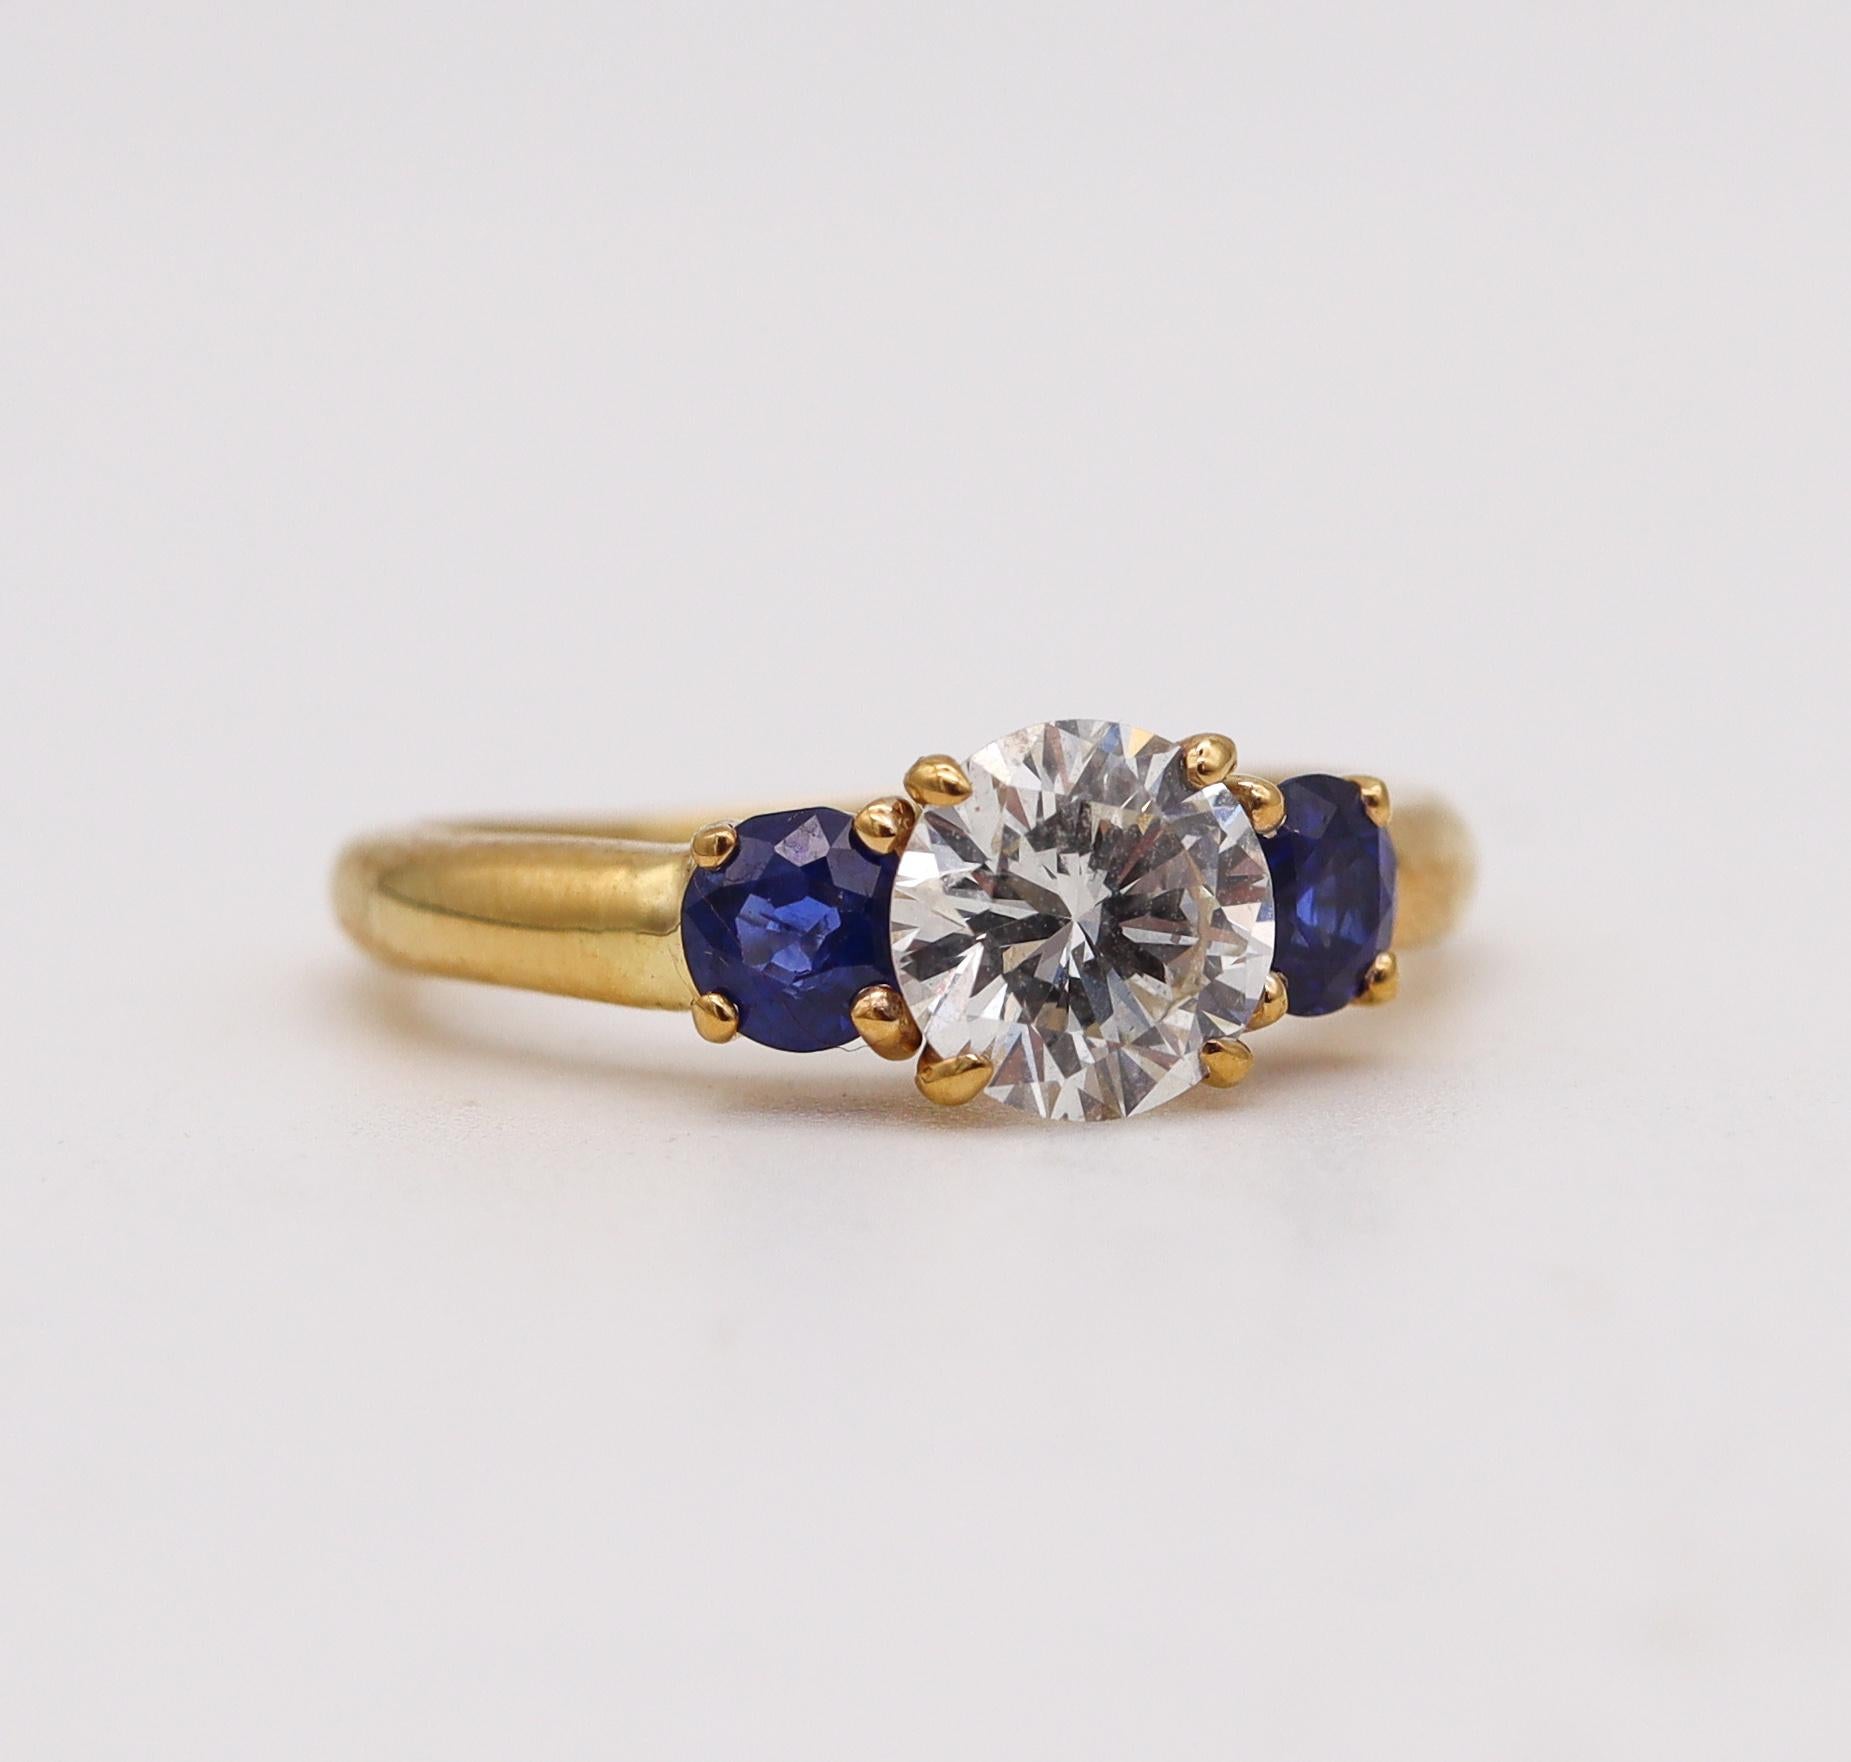 Brilliant Cut Van Cleef & Arpels Gia Certified Gems Ring in 18Kt Gold with Diamond & Sapphires